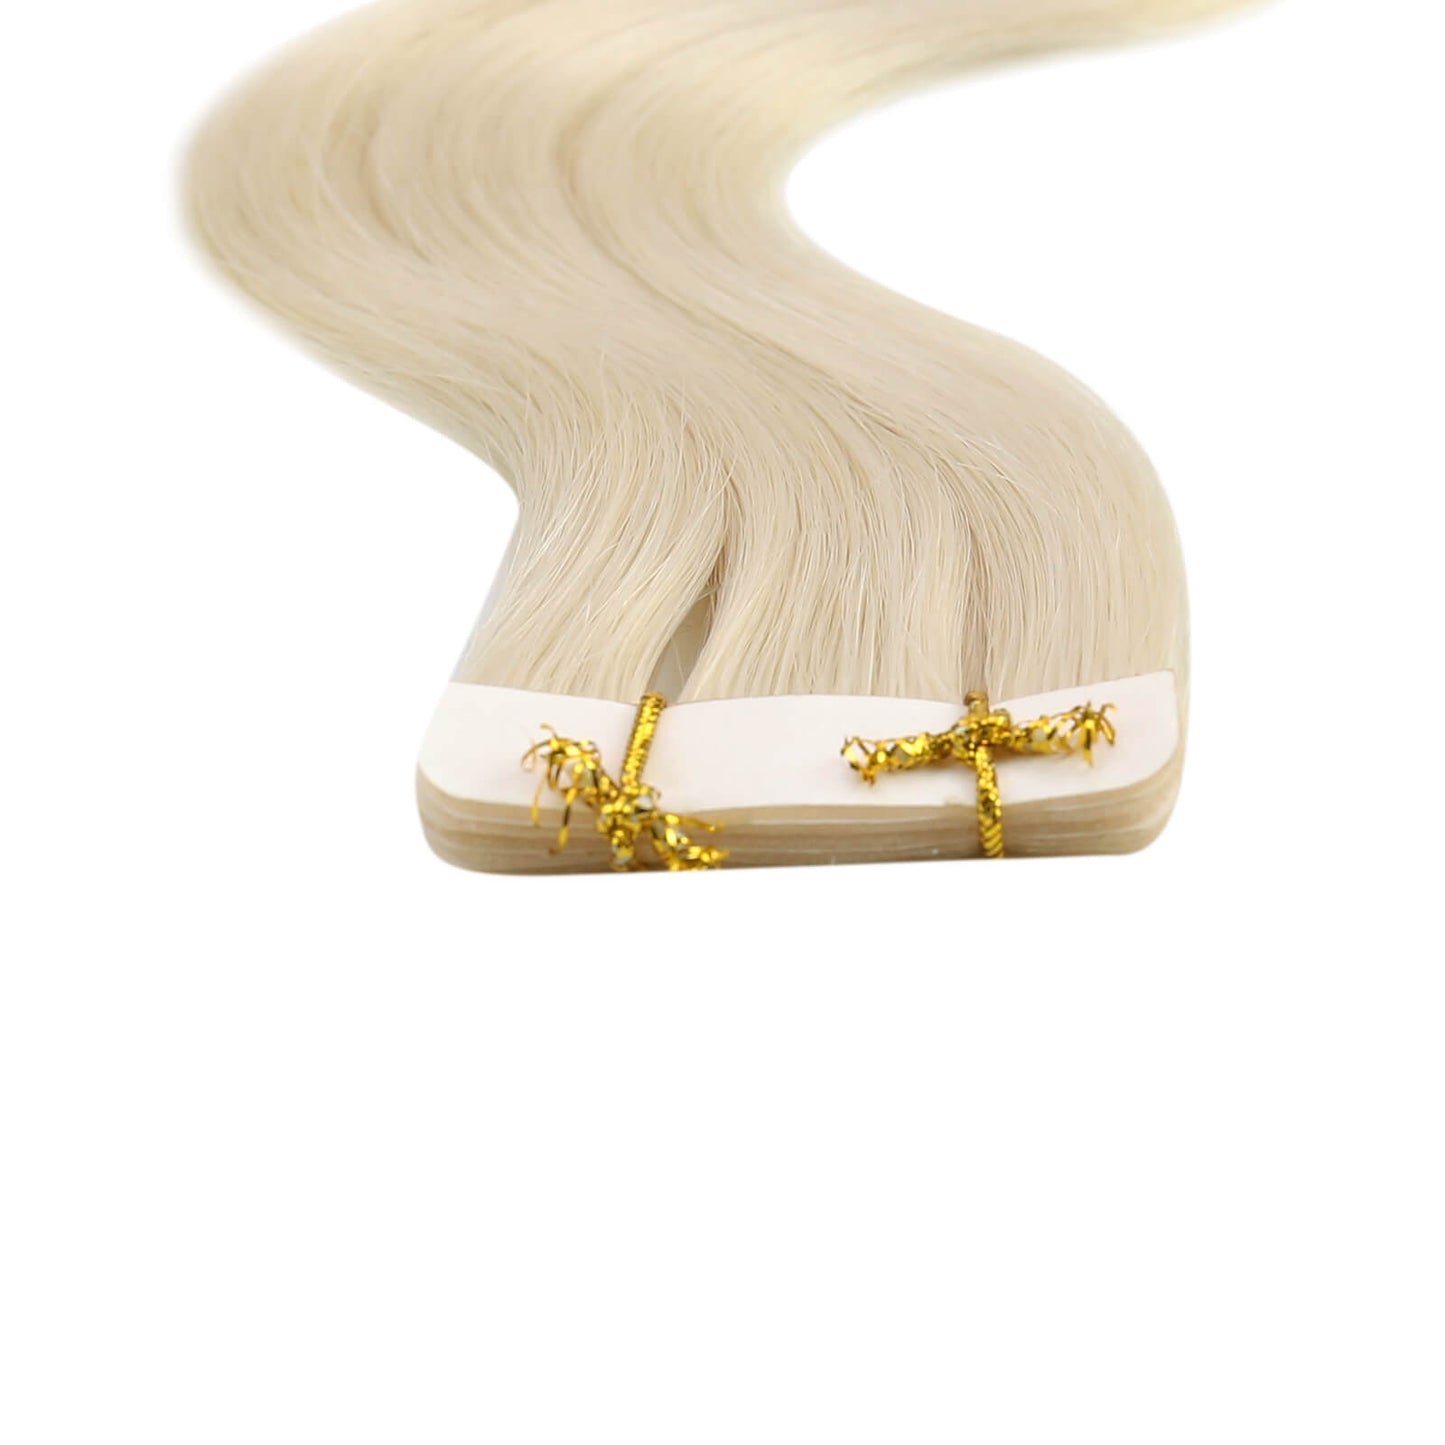 tape in extensions blonde human hair curly professional tape in hair extensions